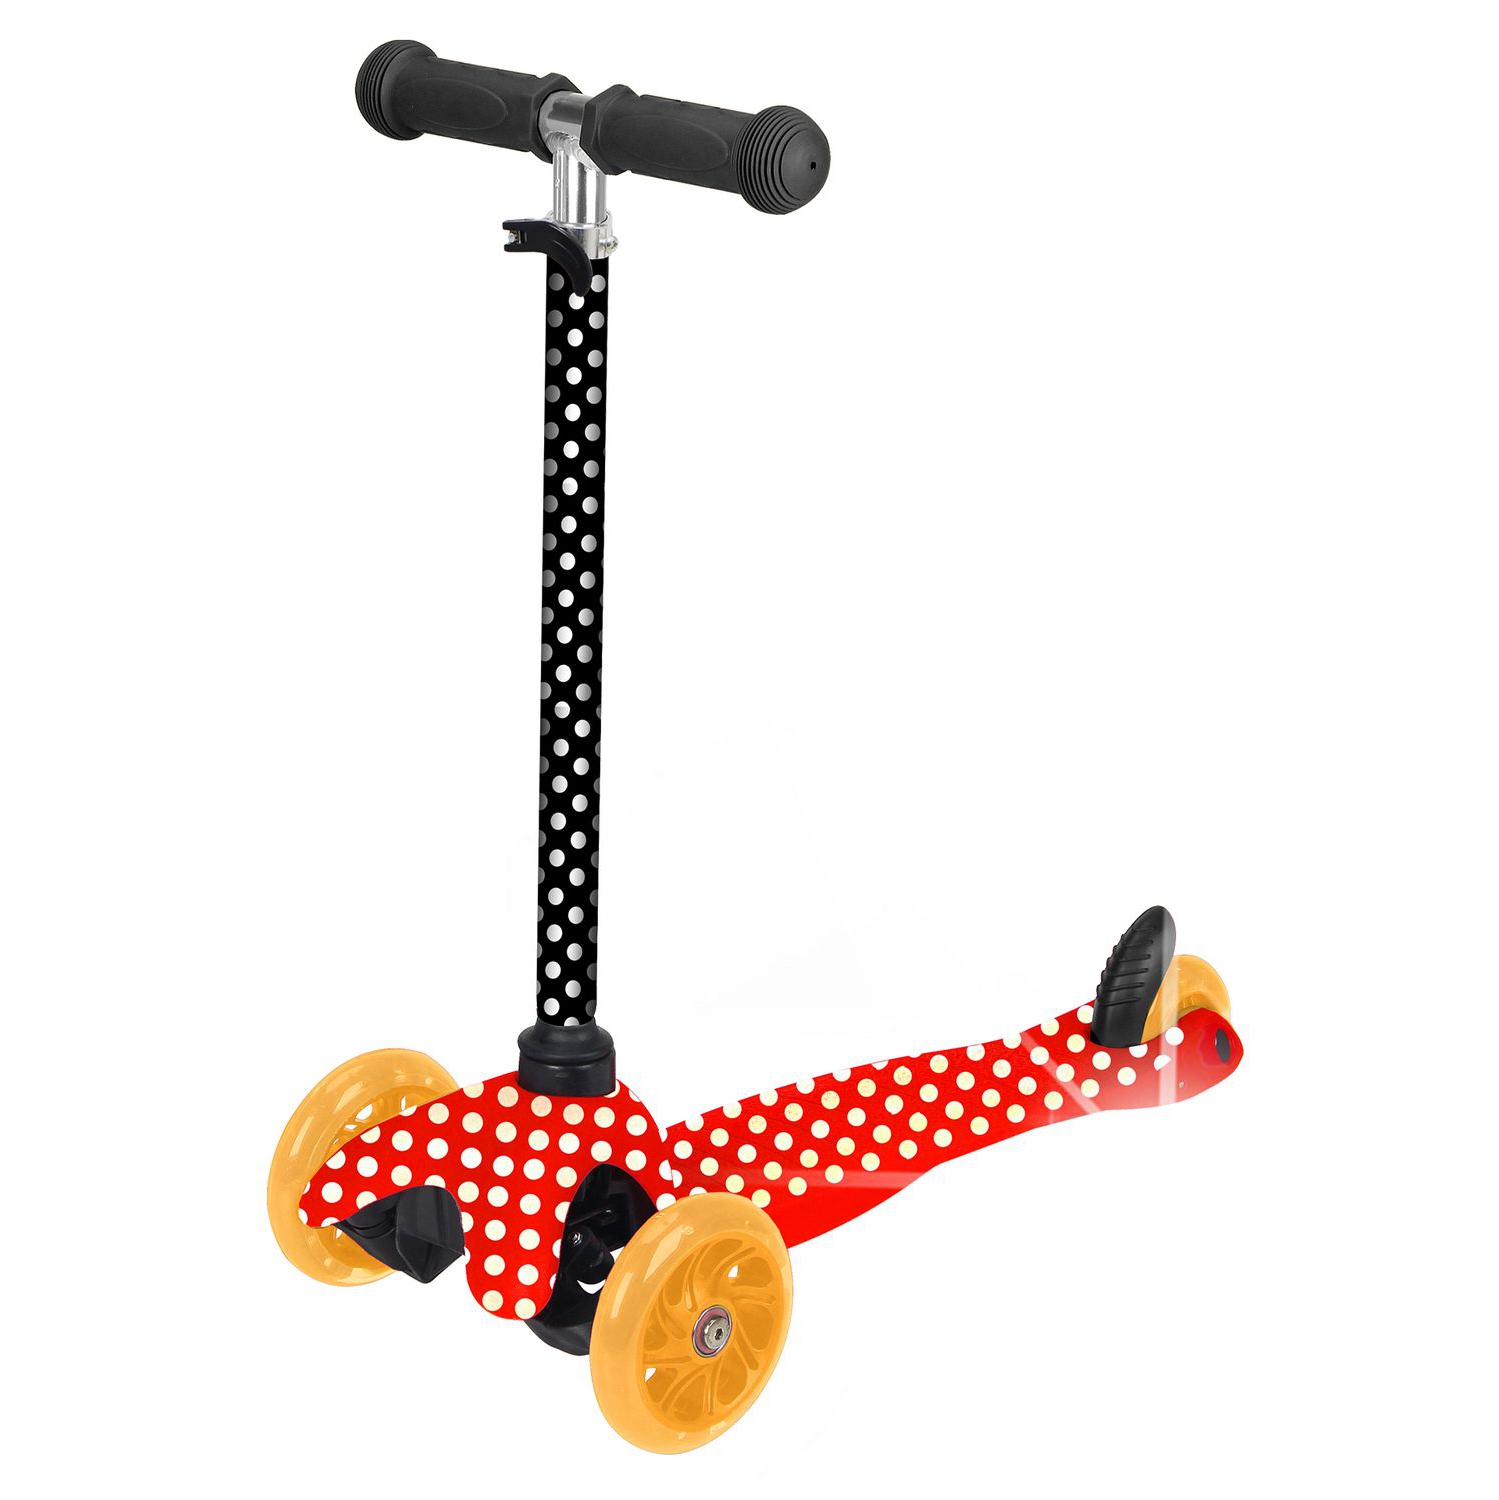 Rugged Racer Mini Deluxe 3-Wheel Scooter with LED Lights and Red Polka Dot Design